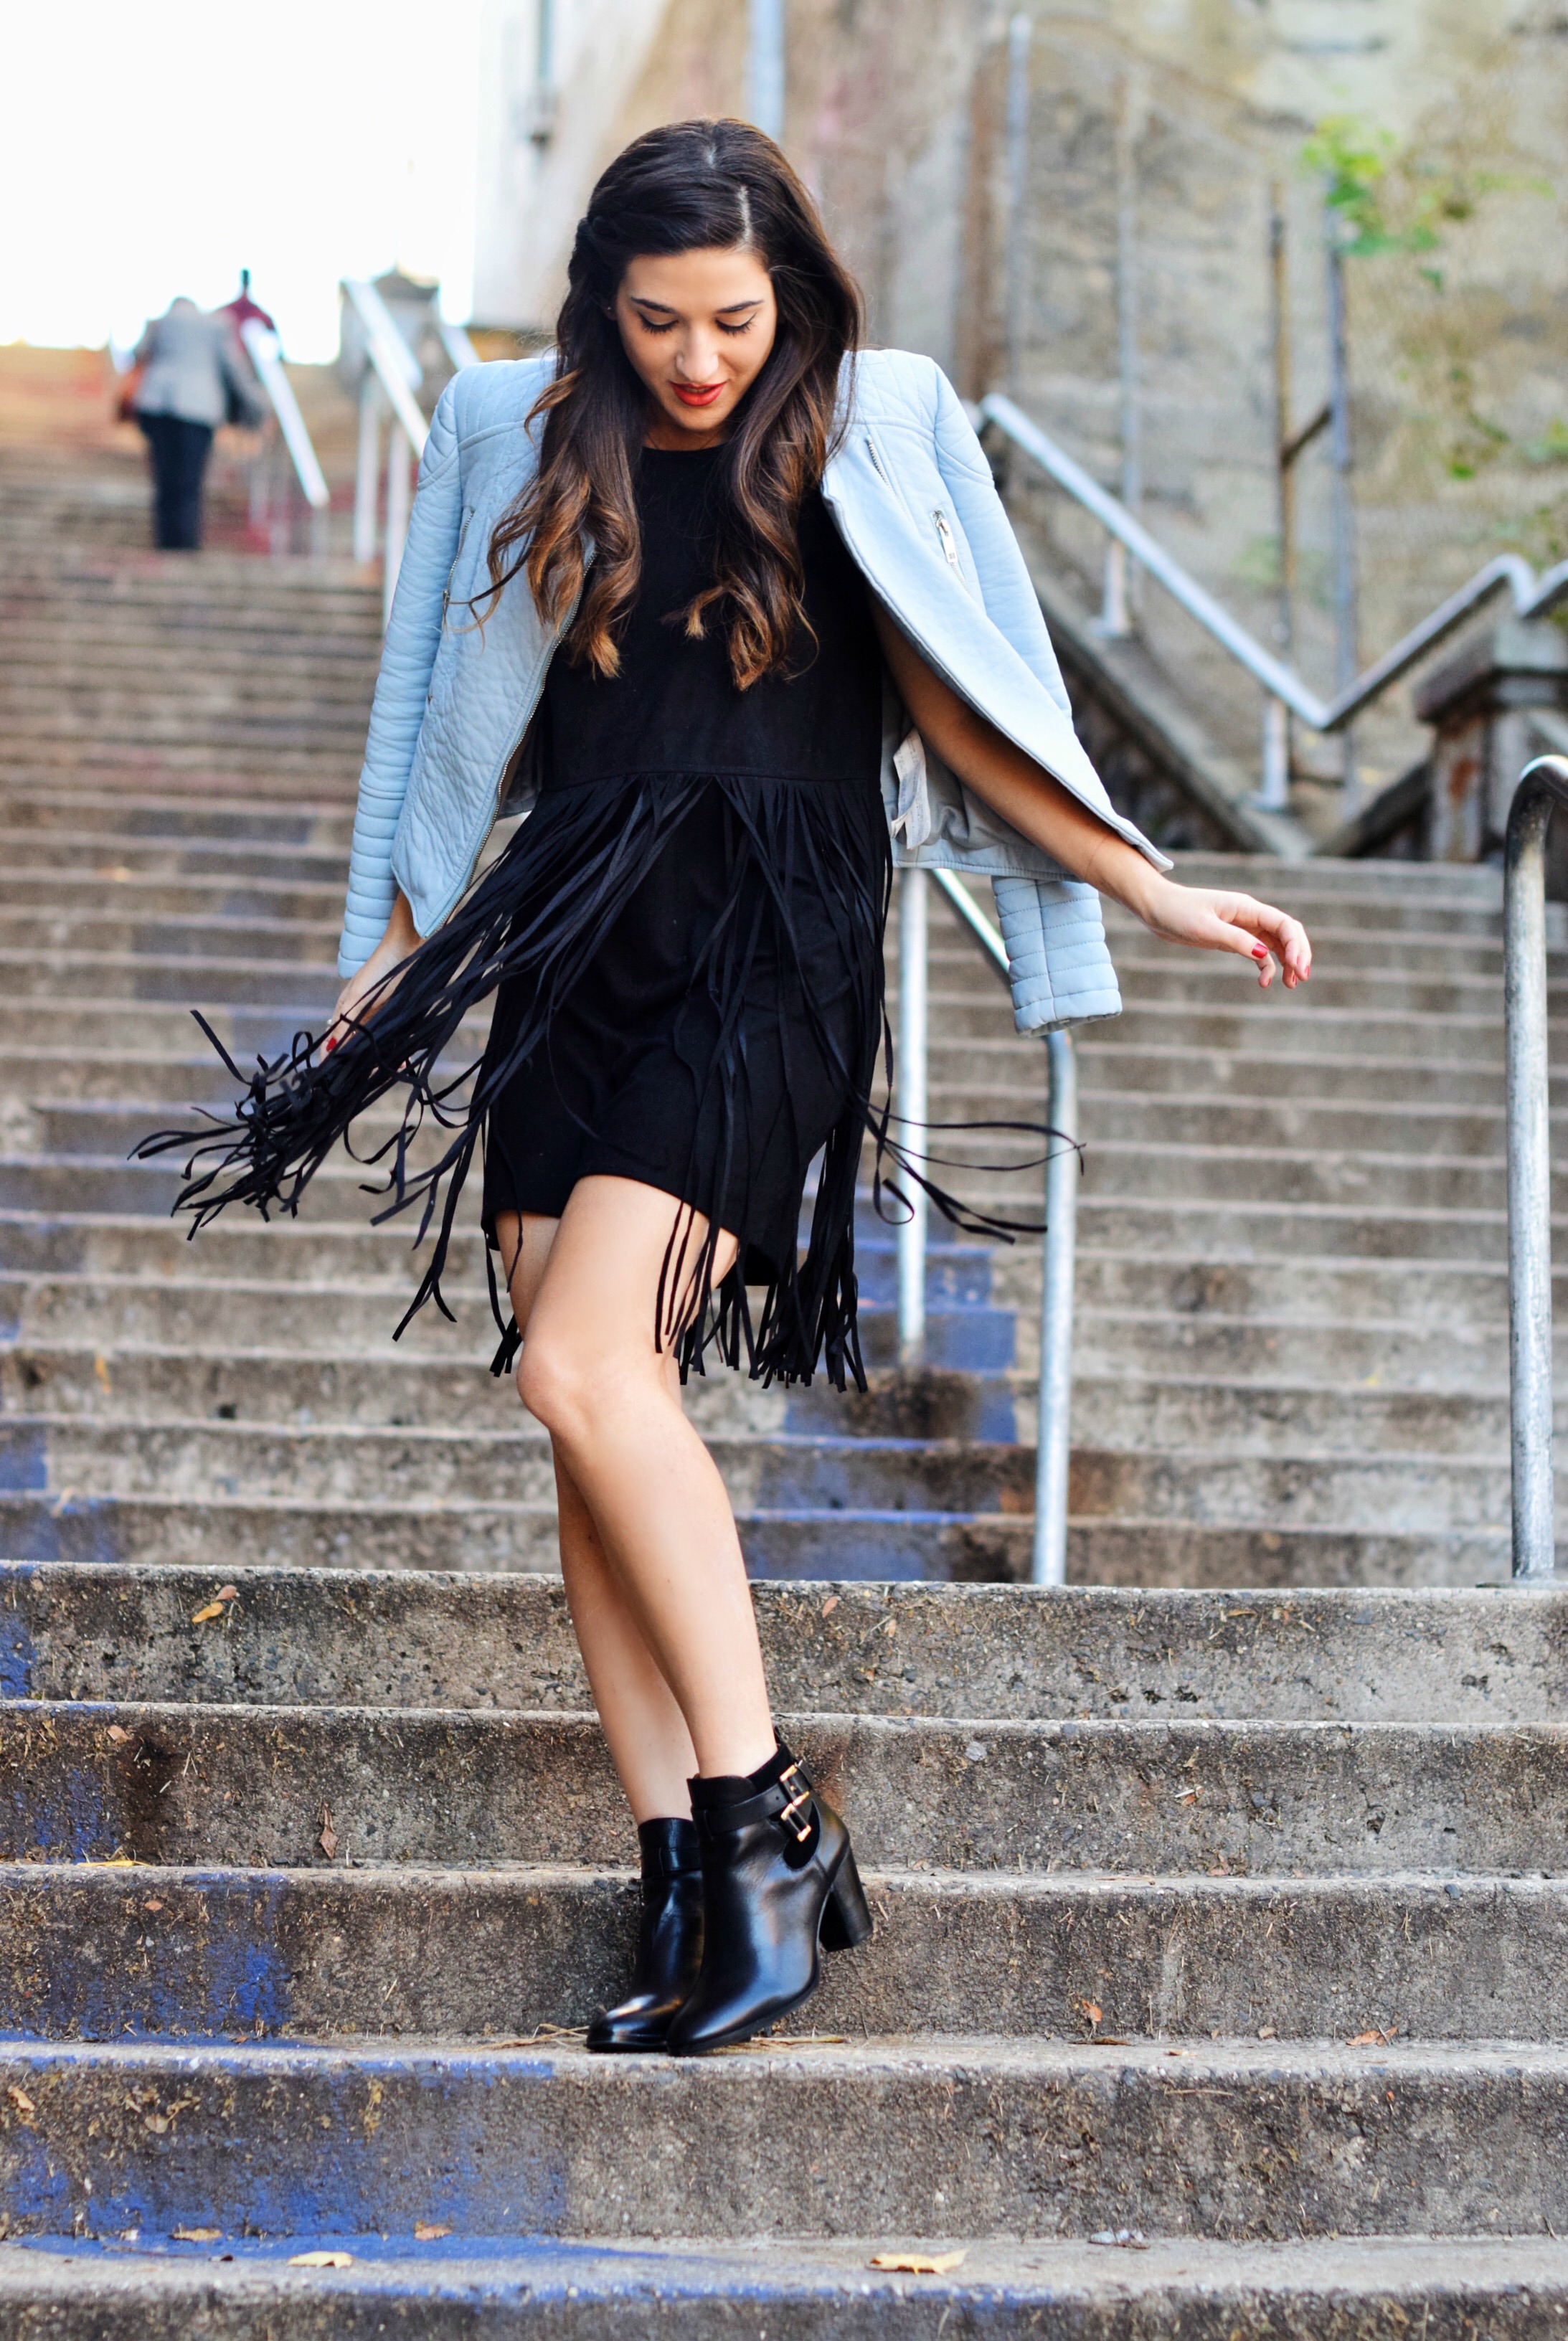 Black Fringe Dress Trèscool Louboutins & Love Fashion Blog Esther Santer NYC Street Style Blogger Baby Blue Leather Jacket Zara Hair Girl Model Photoshoot Booties Nordstrom Outfit OOTD Pretty Red Nail Polish Trendy Shoes Winter Fall Look  Shop Inspo.jpg